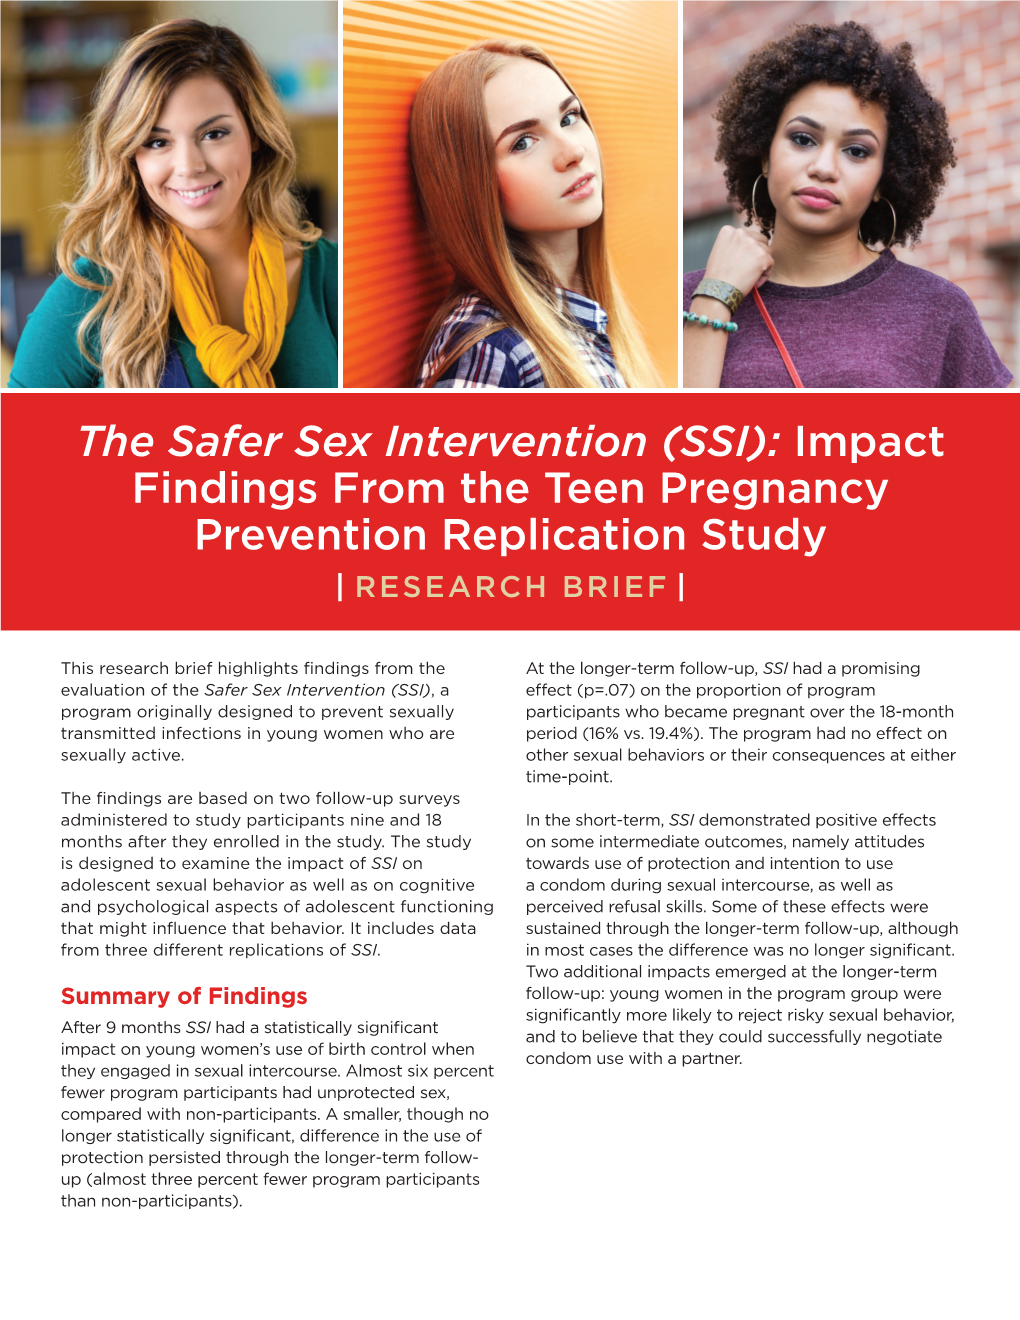 The Safer Sex Intervention (SSI): Impact Findings from the Teen Pregnancy Prevention Replication Study RESEARCH BRIEF